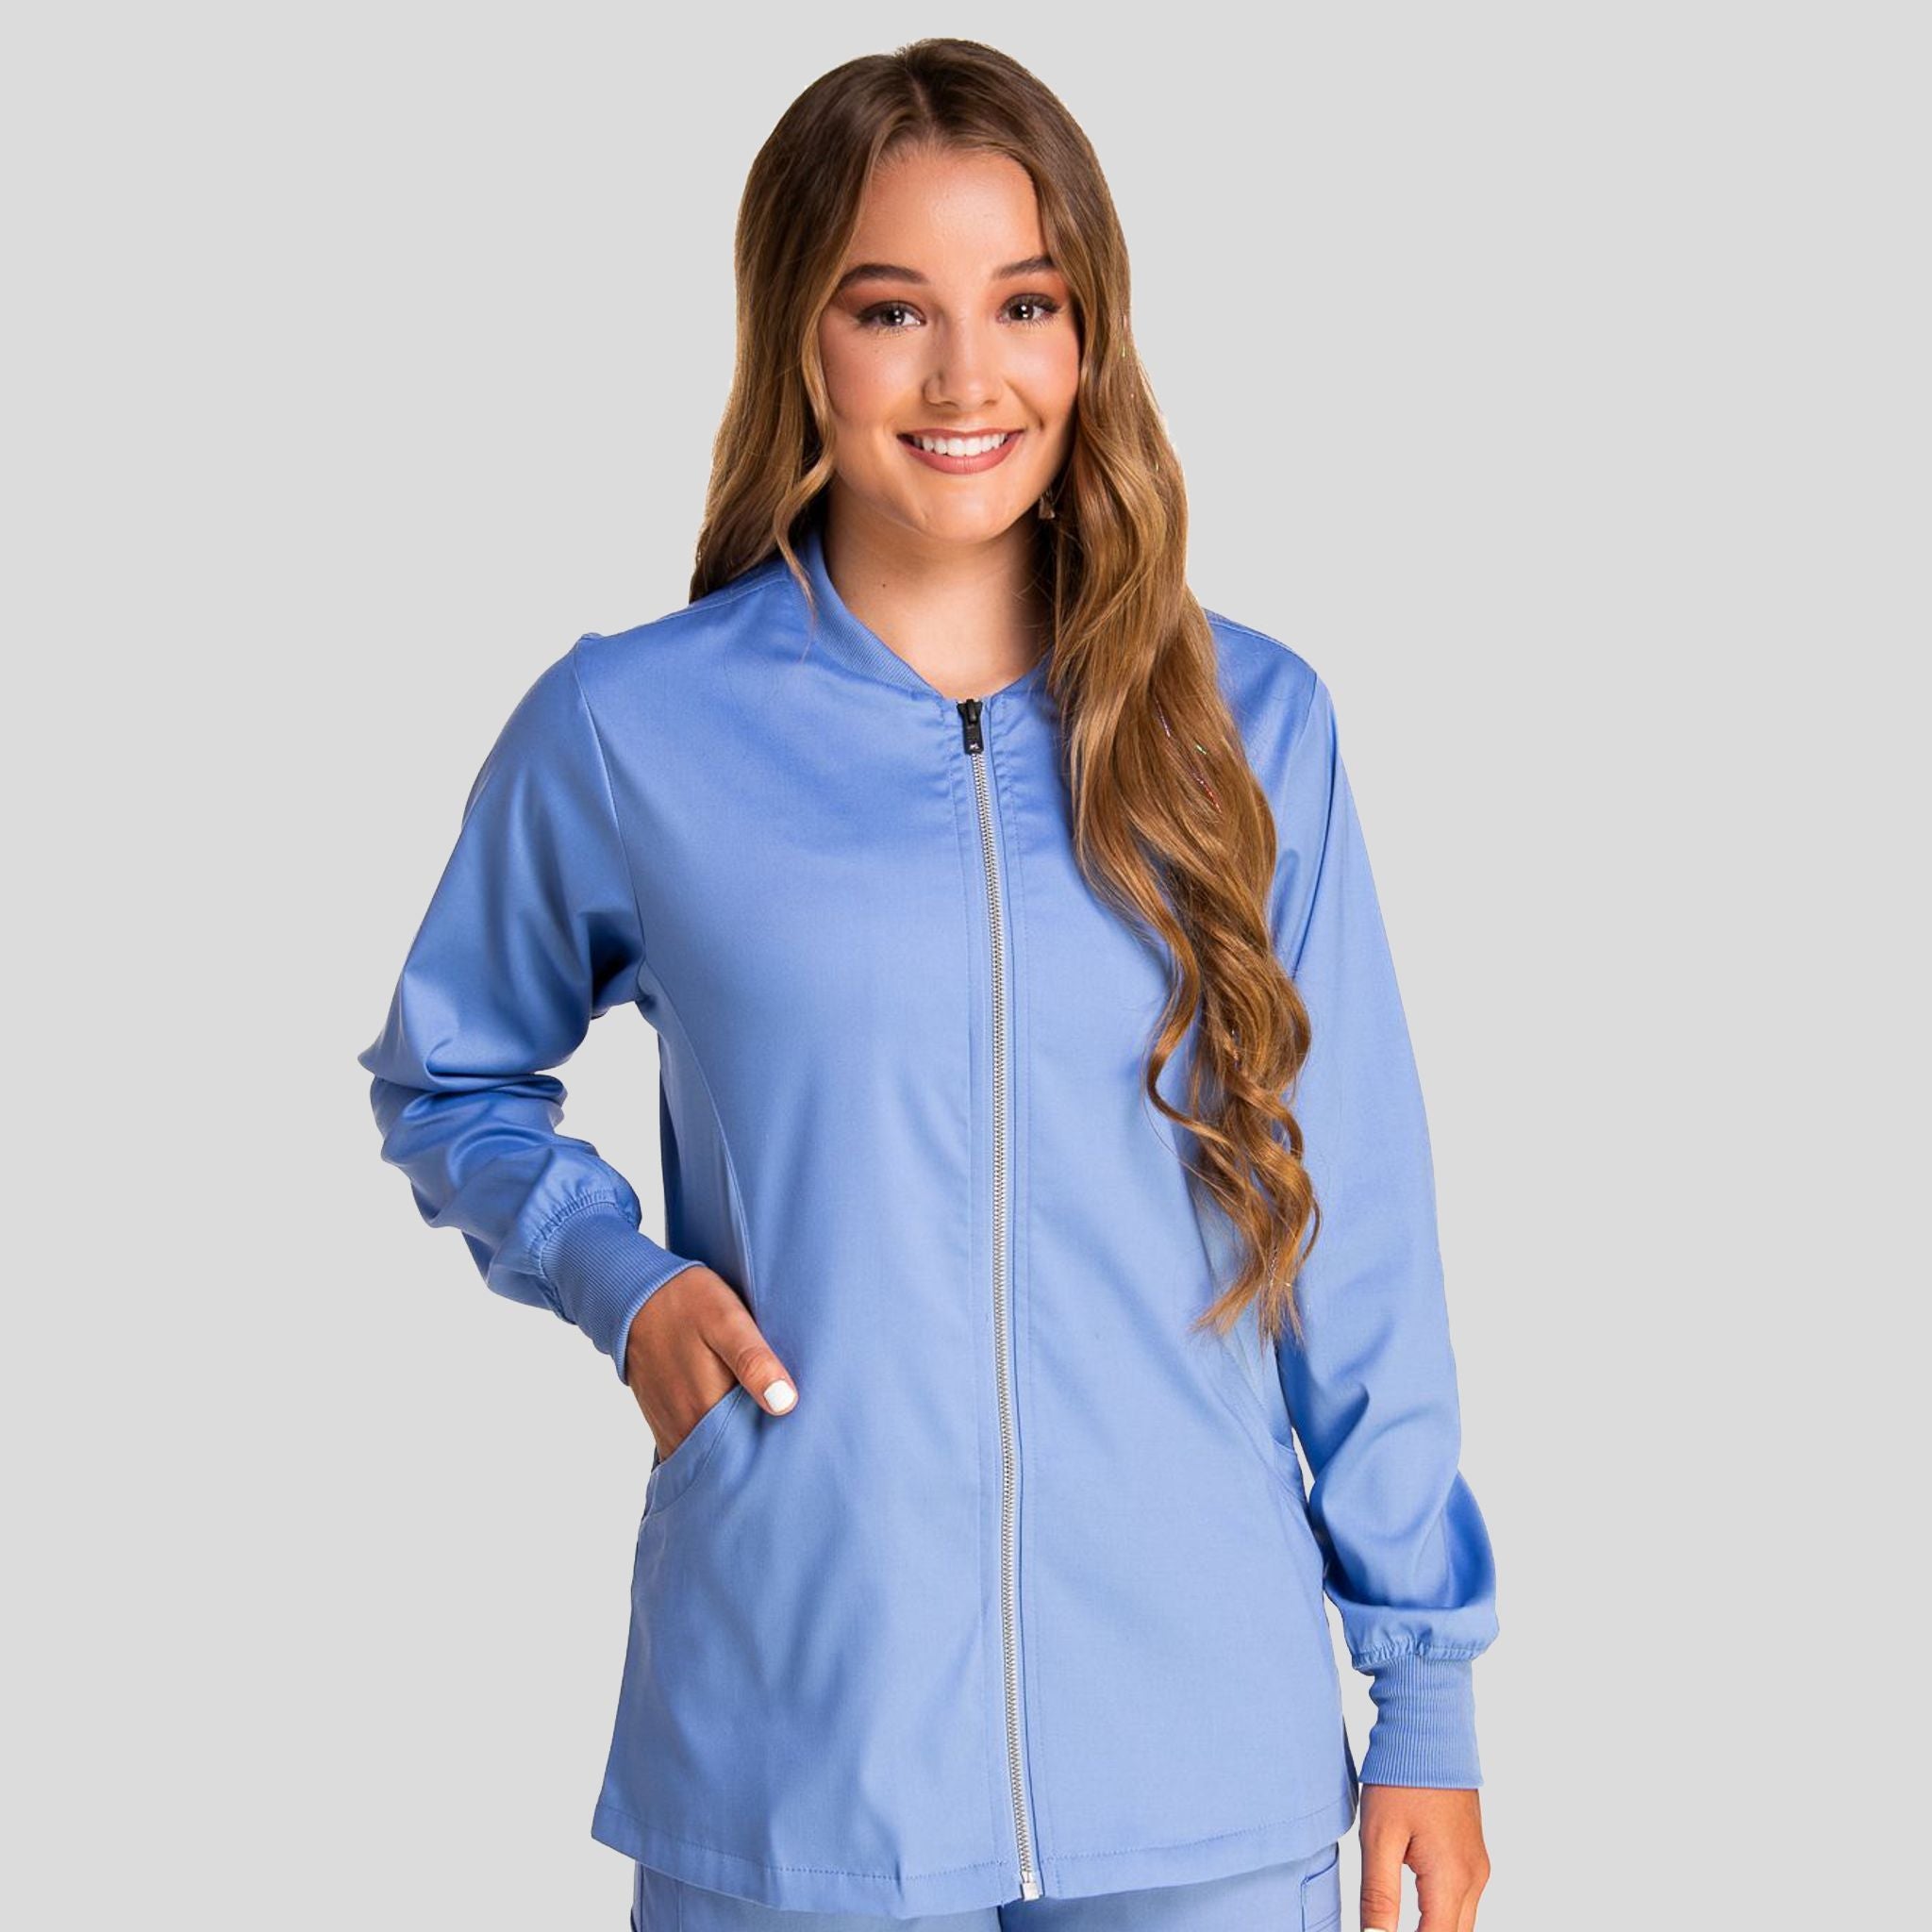 Edge by IRG : Women's zip front jacket style 2811